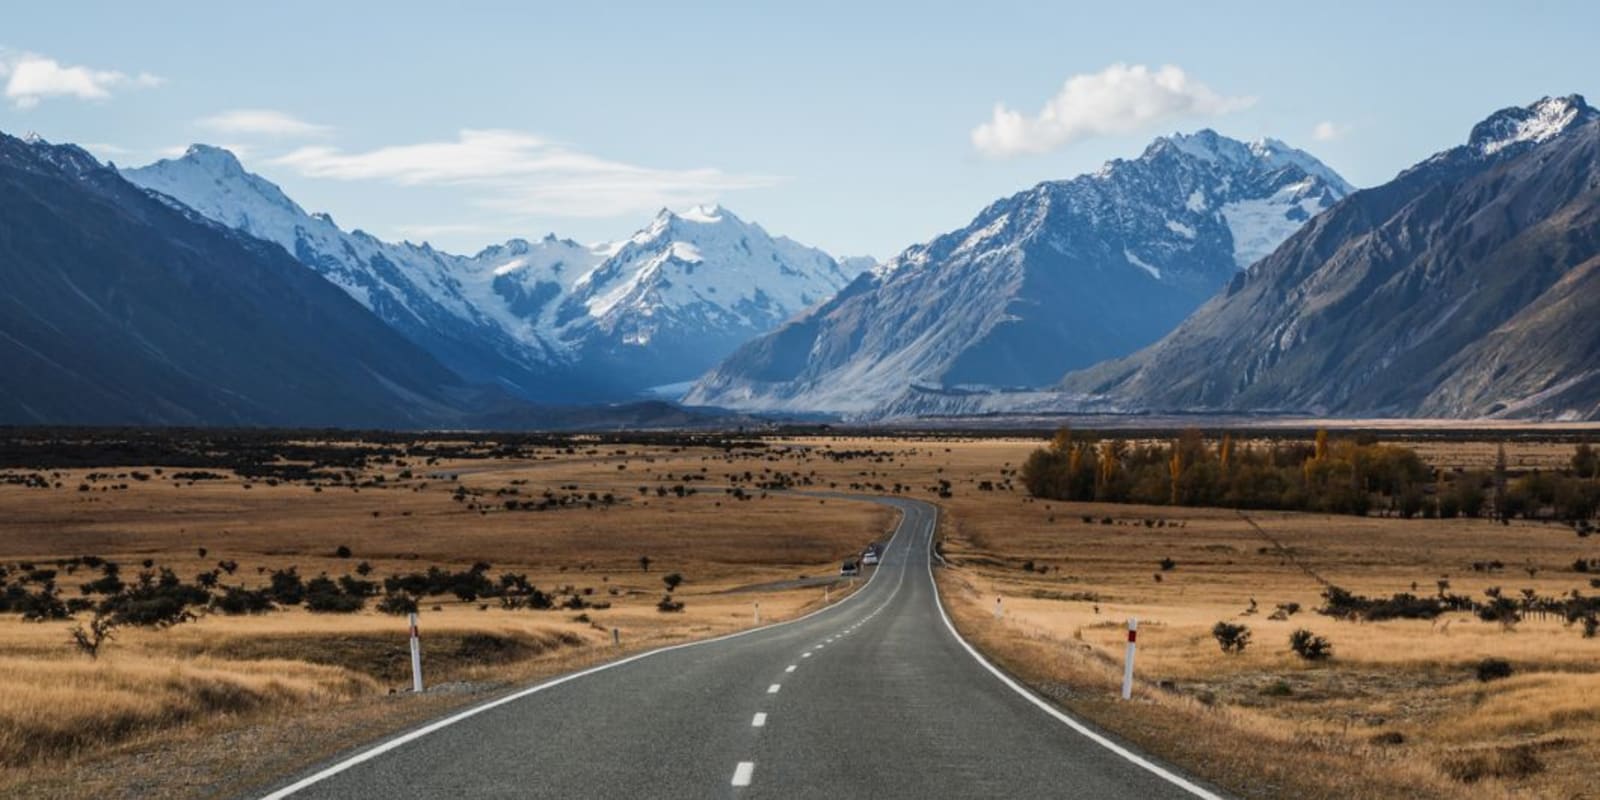 A long straight road heading towards snowcapped mountains in New Zealand